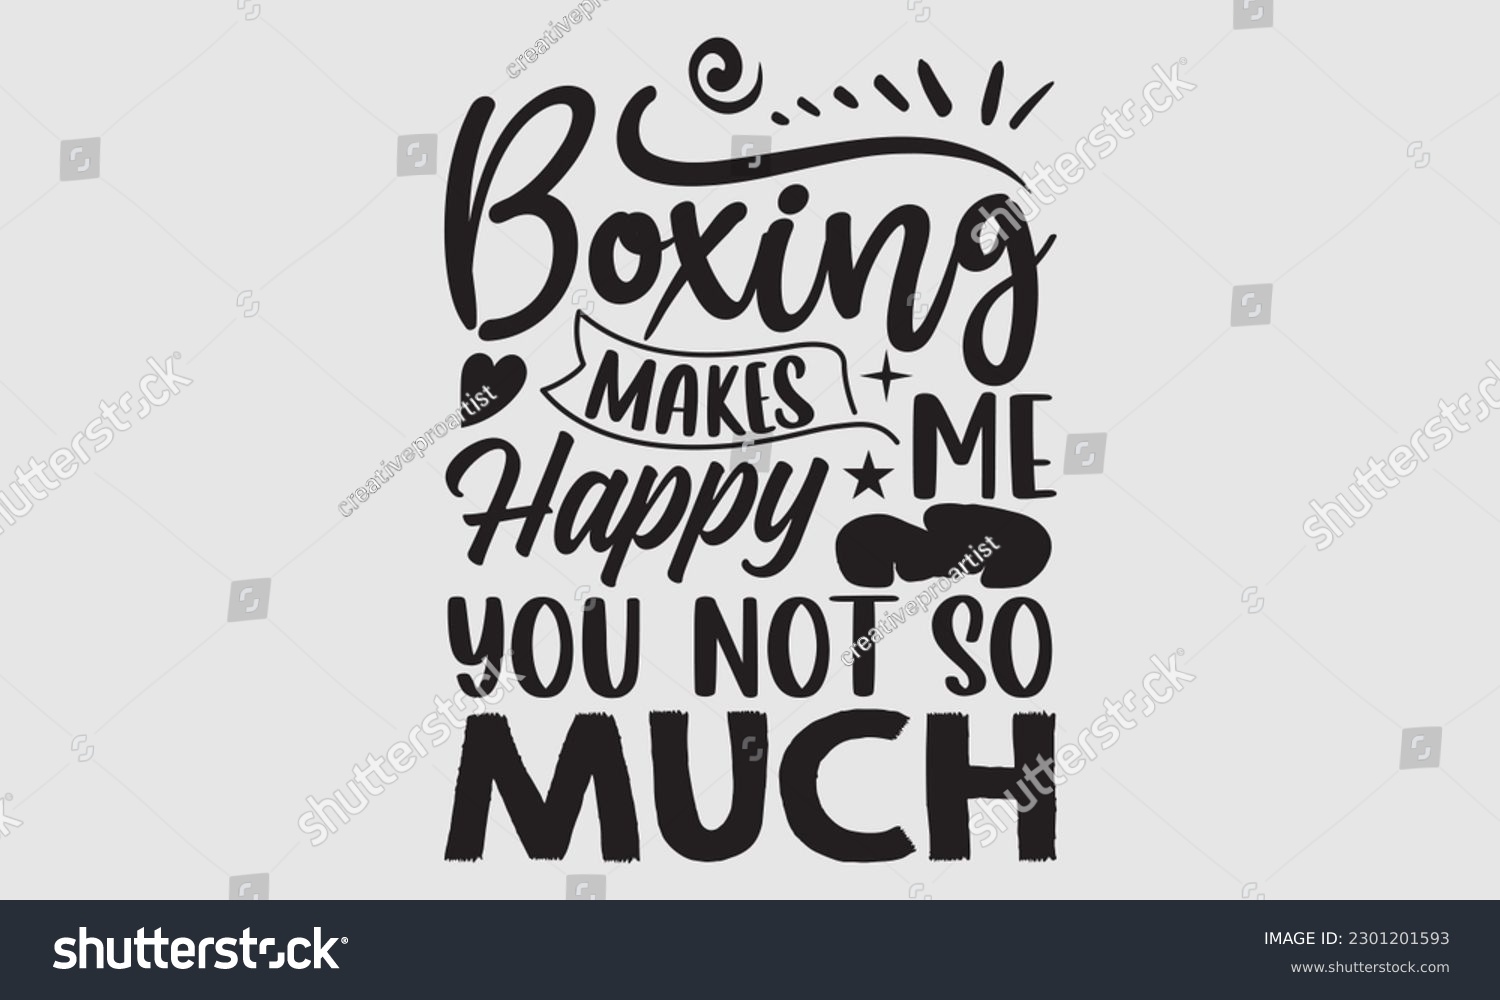 SVG of Boxing makes me happy you not so much- Boxing T- shirt design, Hand drawn lettering phrase, Handmade calligraphy vector illustration Template, eps, SVG Files for Cutting svg